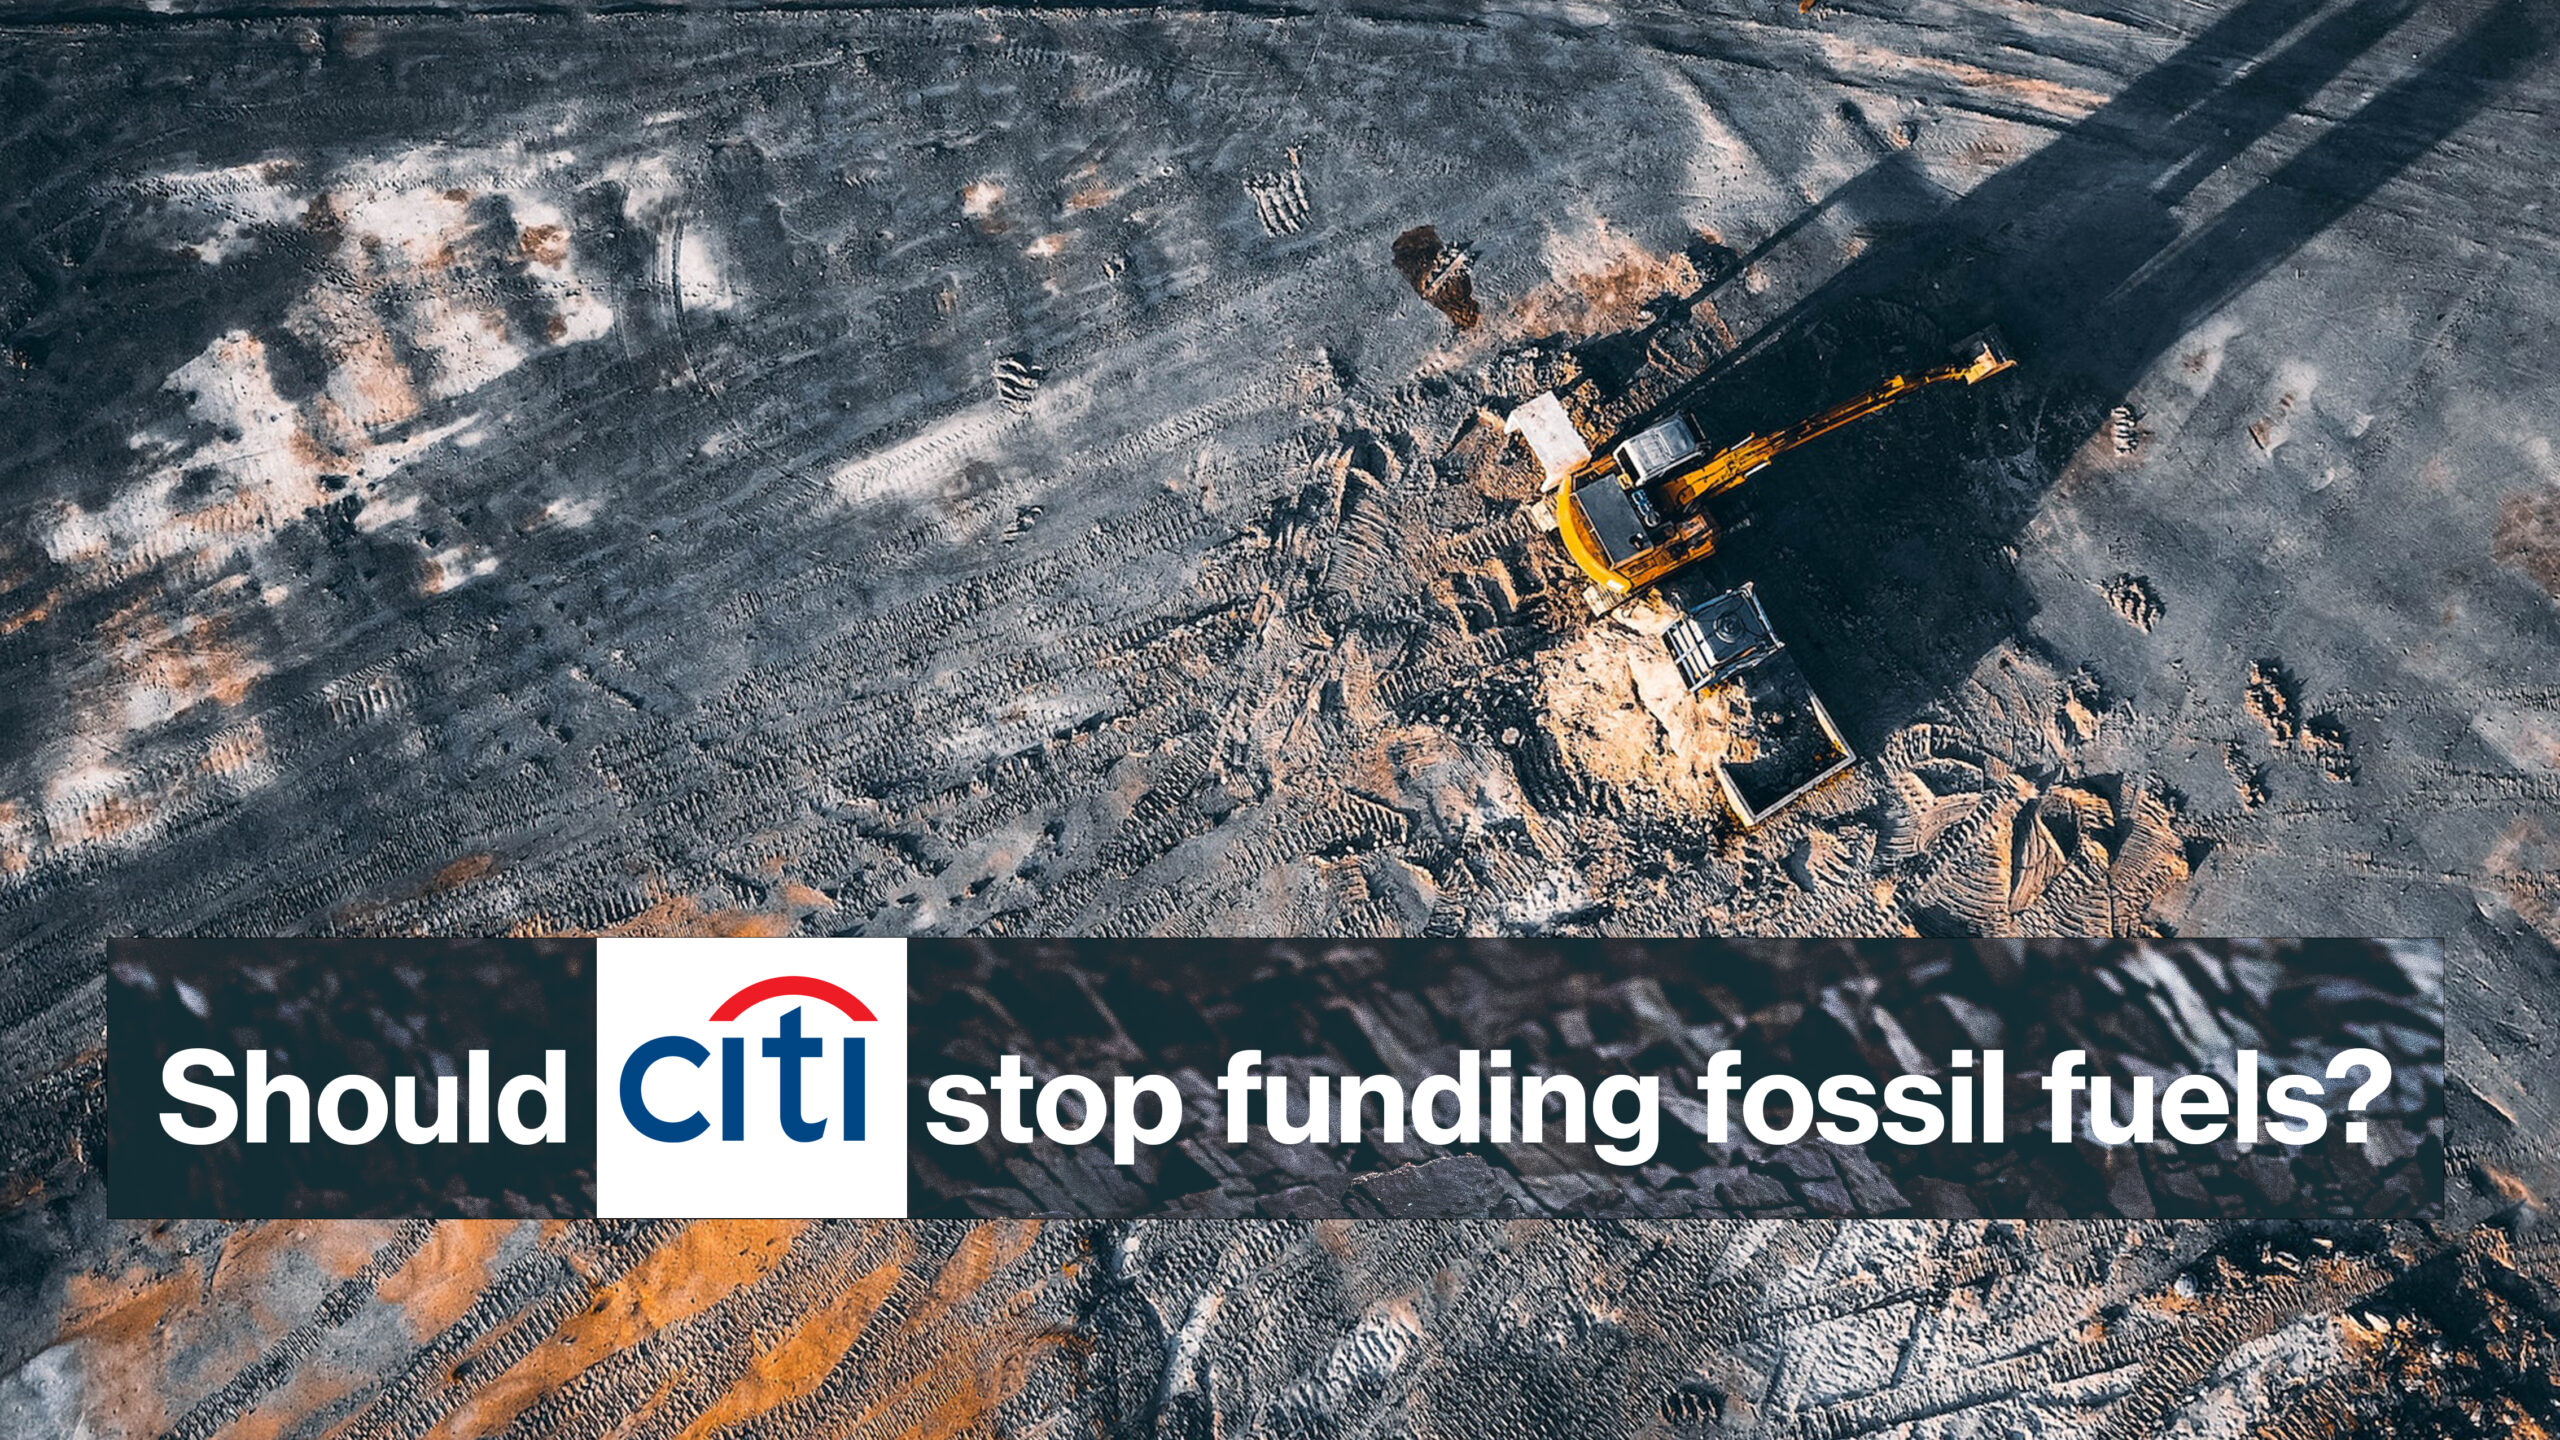 Should Citi stop funding fossil fuel?